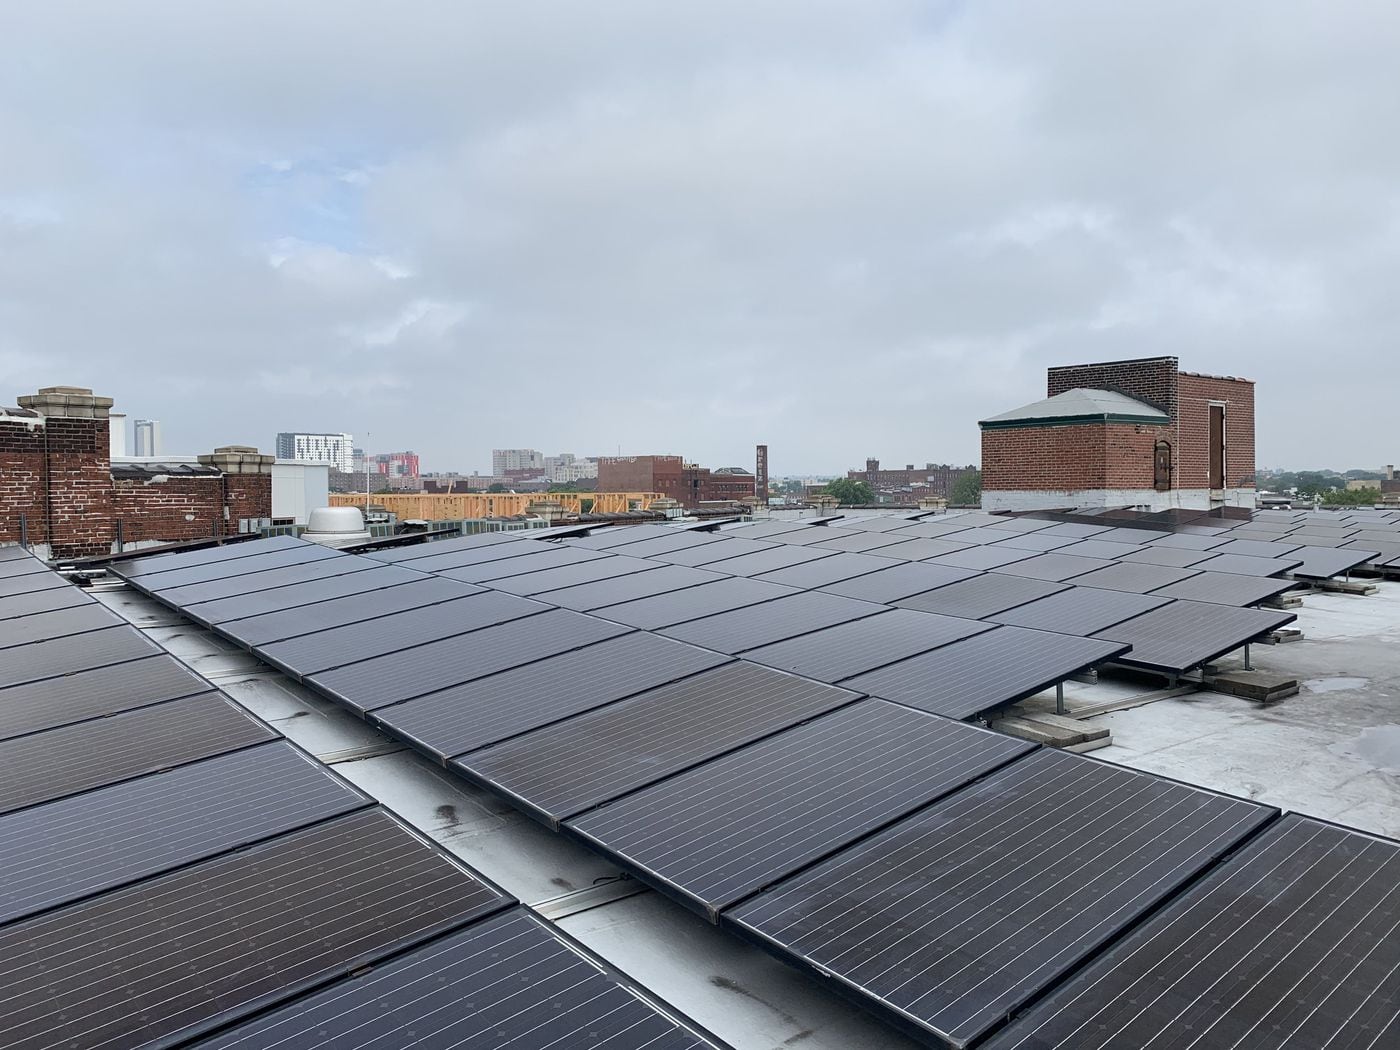 The roof of the Crane Arts Building, in North Philadelphia, is covered in 82 kilowatts of solar panels. People from the clean energy industry gathered beside the panels to discuss the recent report detailing Pennsylvania's clean energy job growth, on Tuesday, June 18.